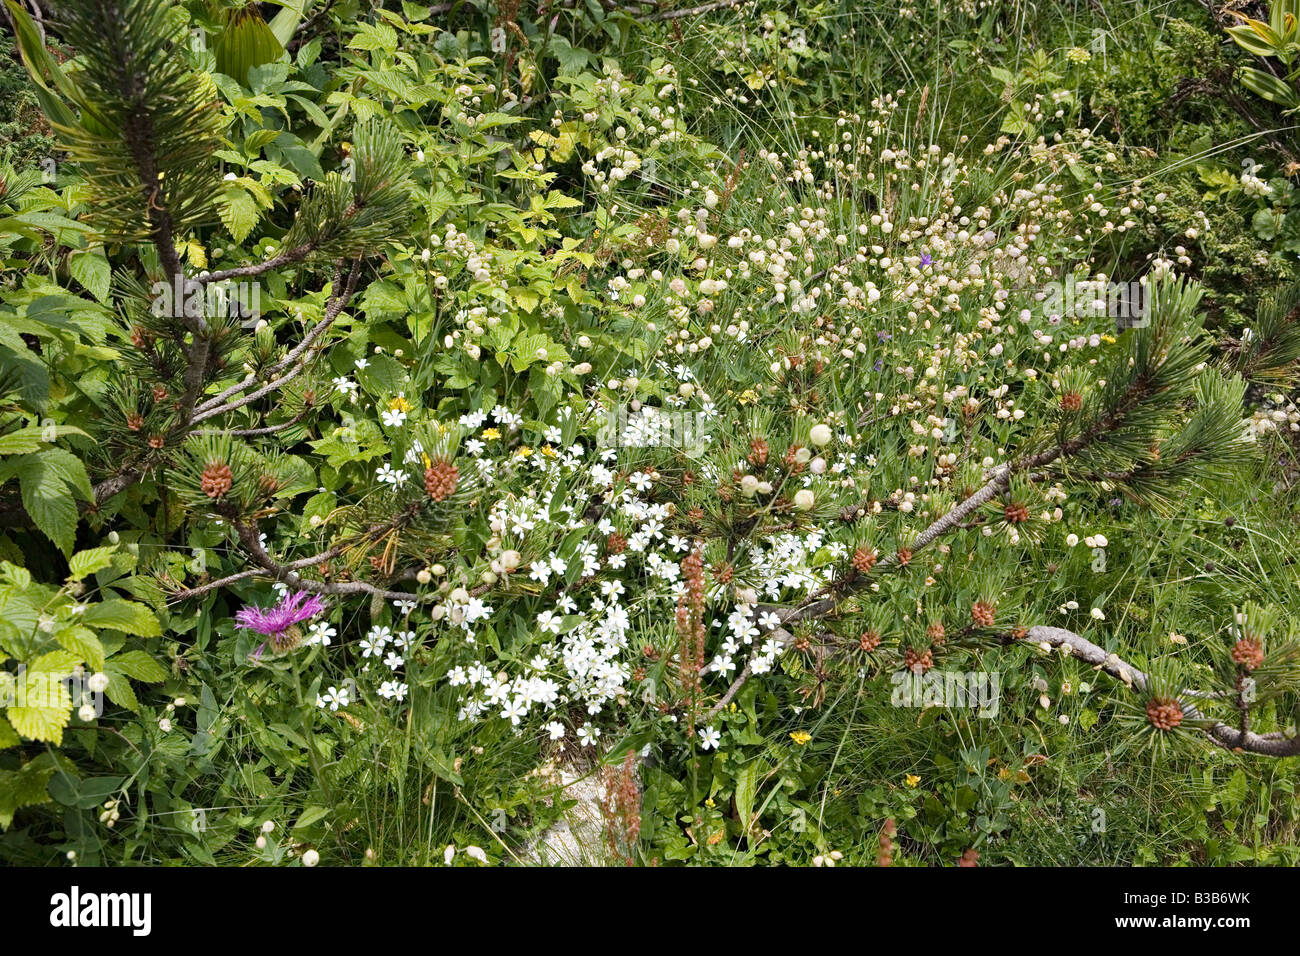 Blooming flowers in World Heritage Site Pirin National Park Bulgaria Stock Photo